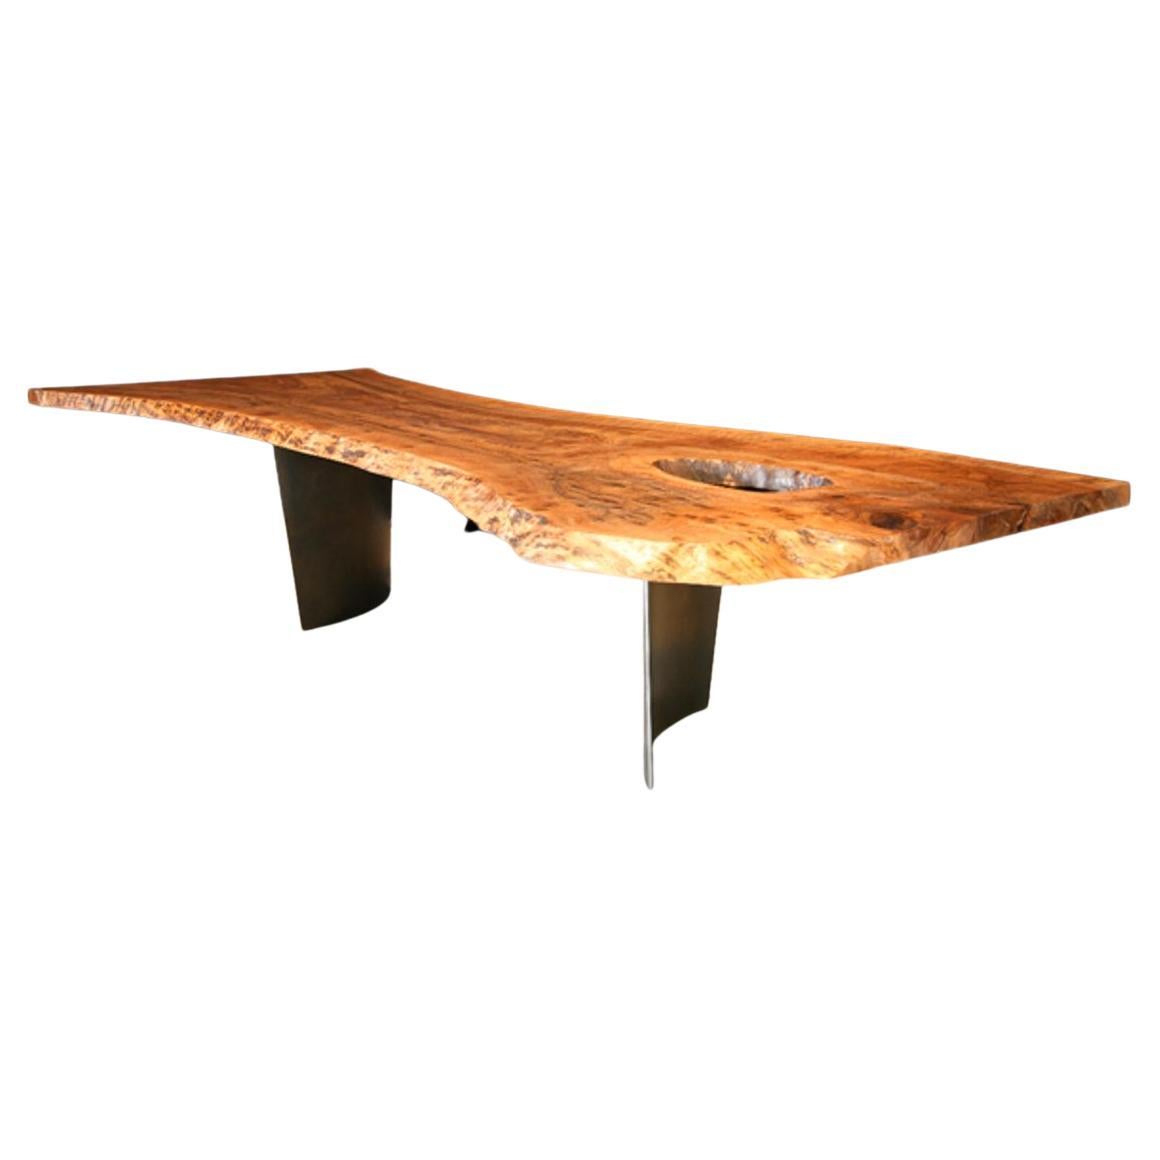 Organic Claro Walnut Dining Table with Curved Patina Legs